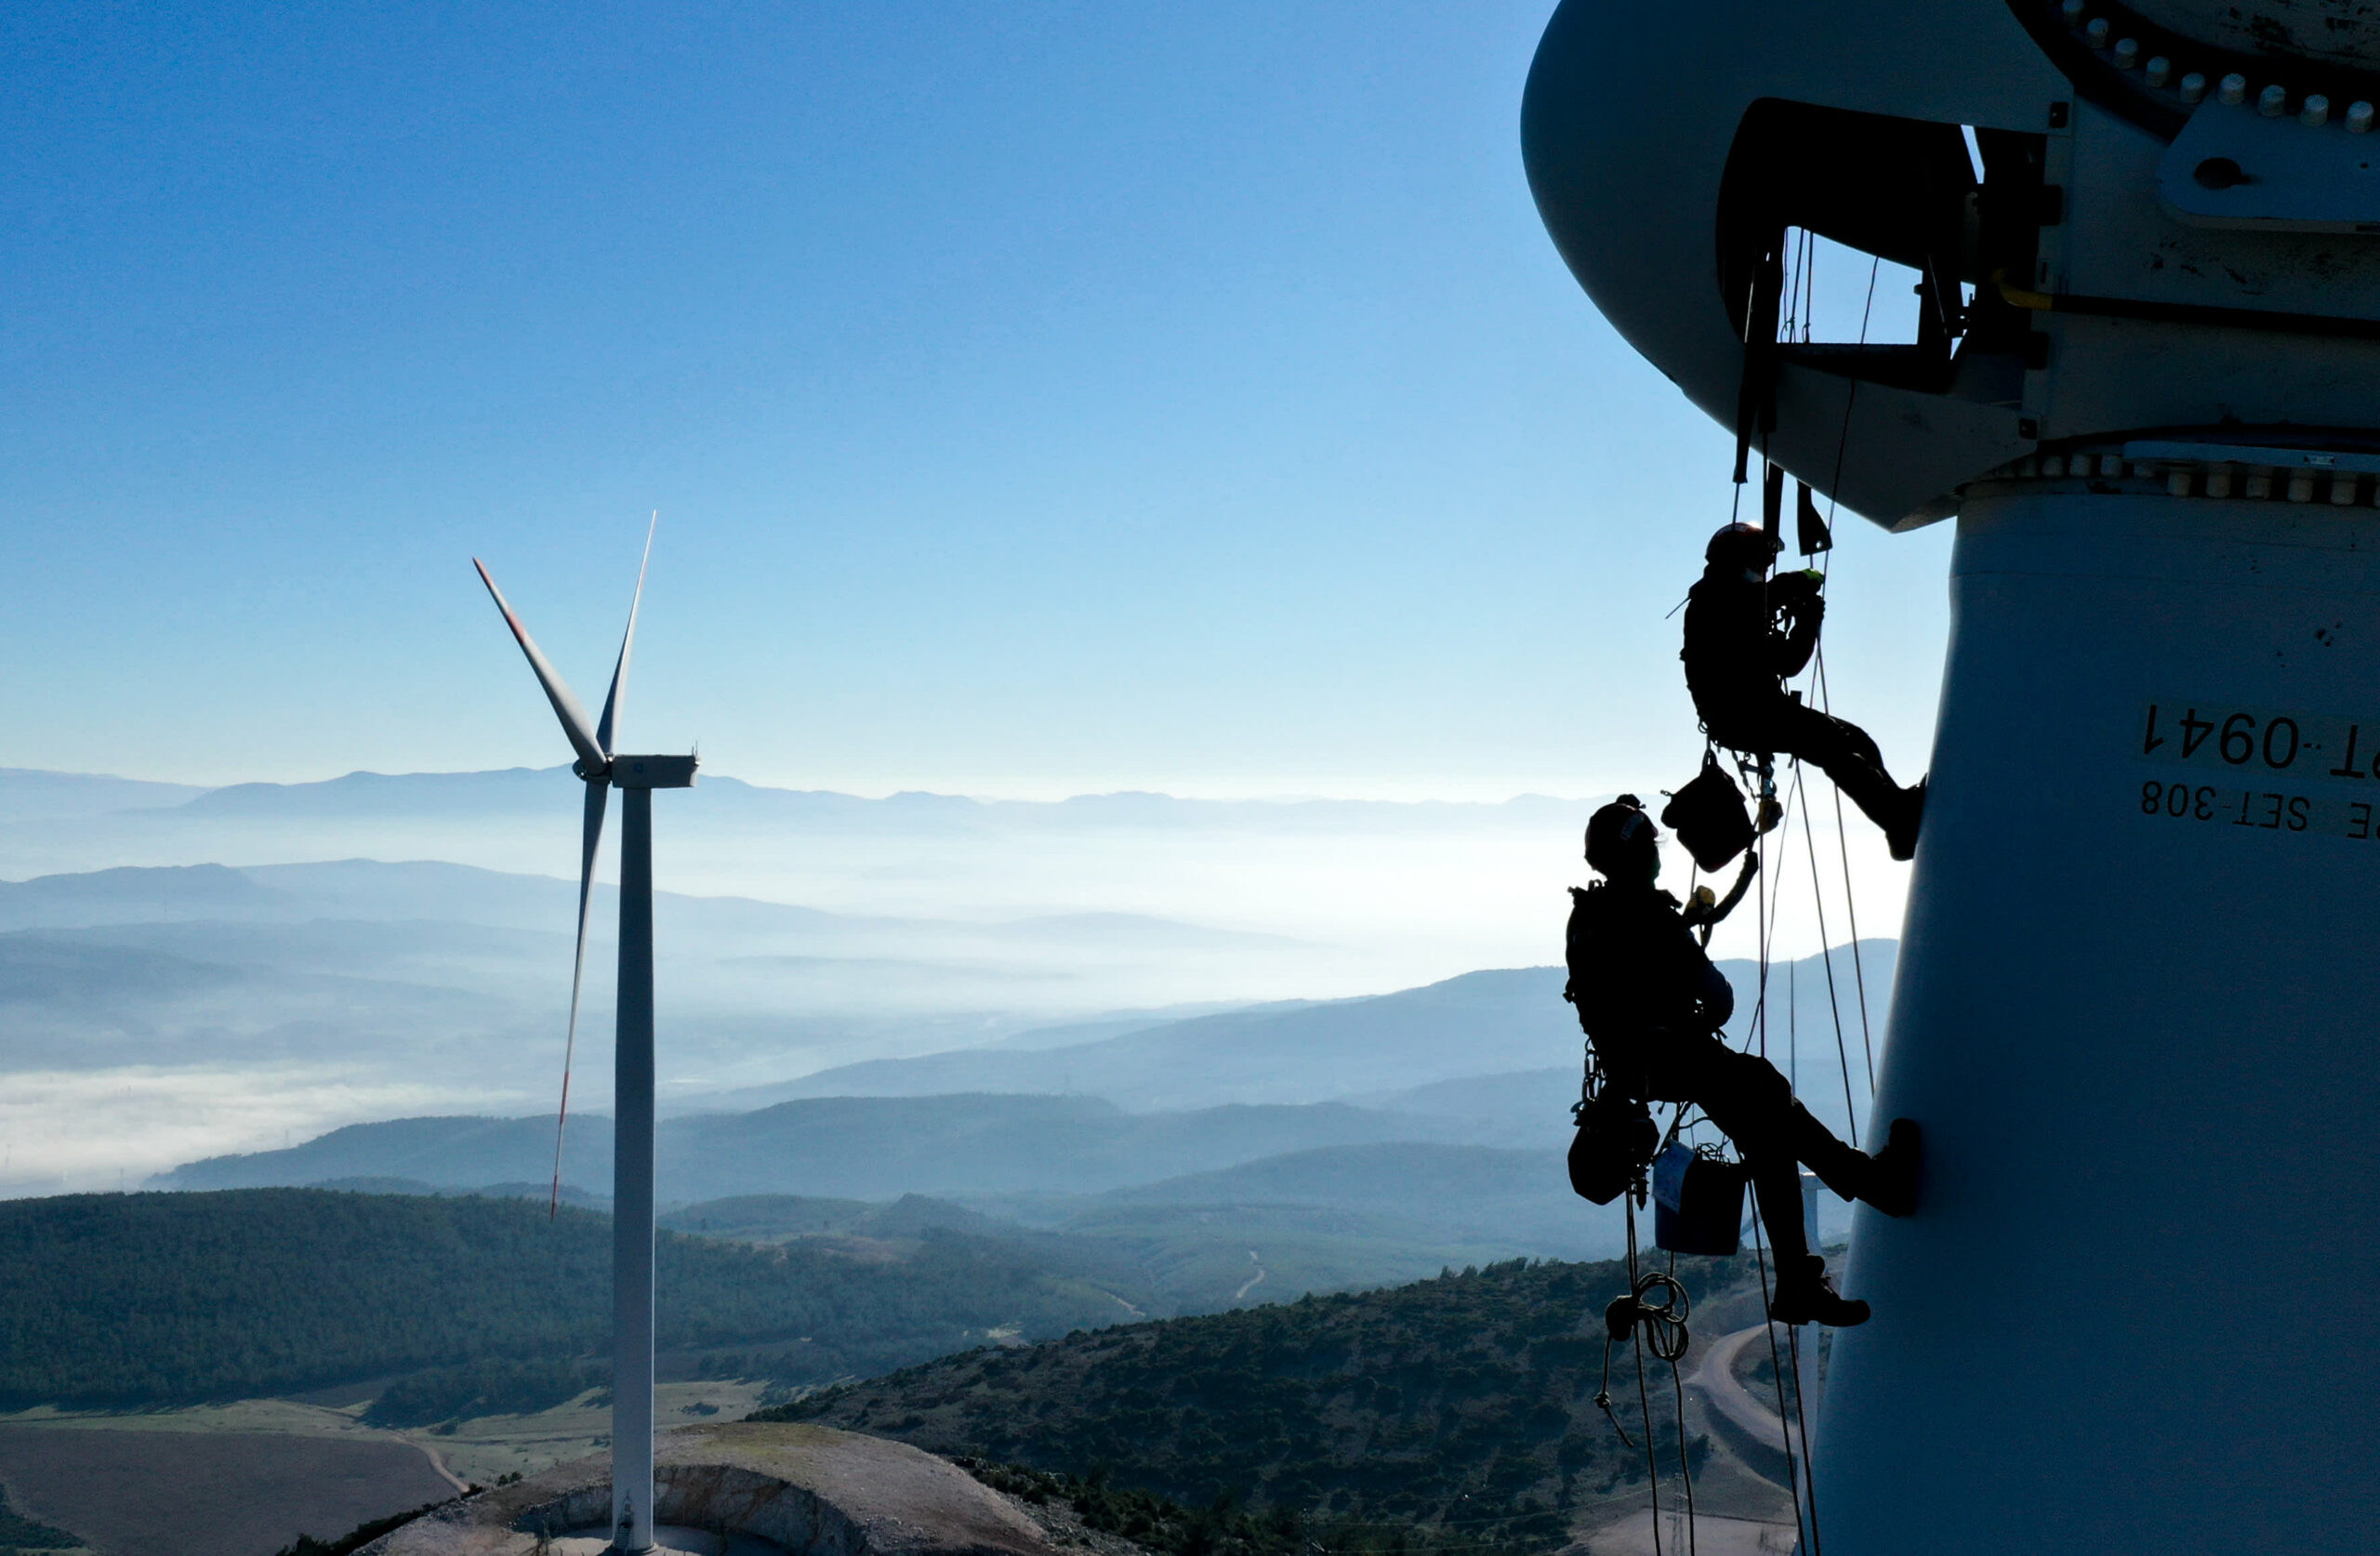 Monster wind generators are going to get even greater